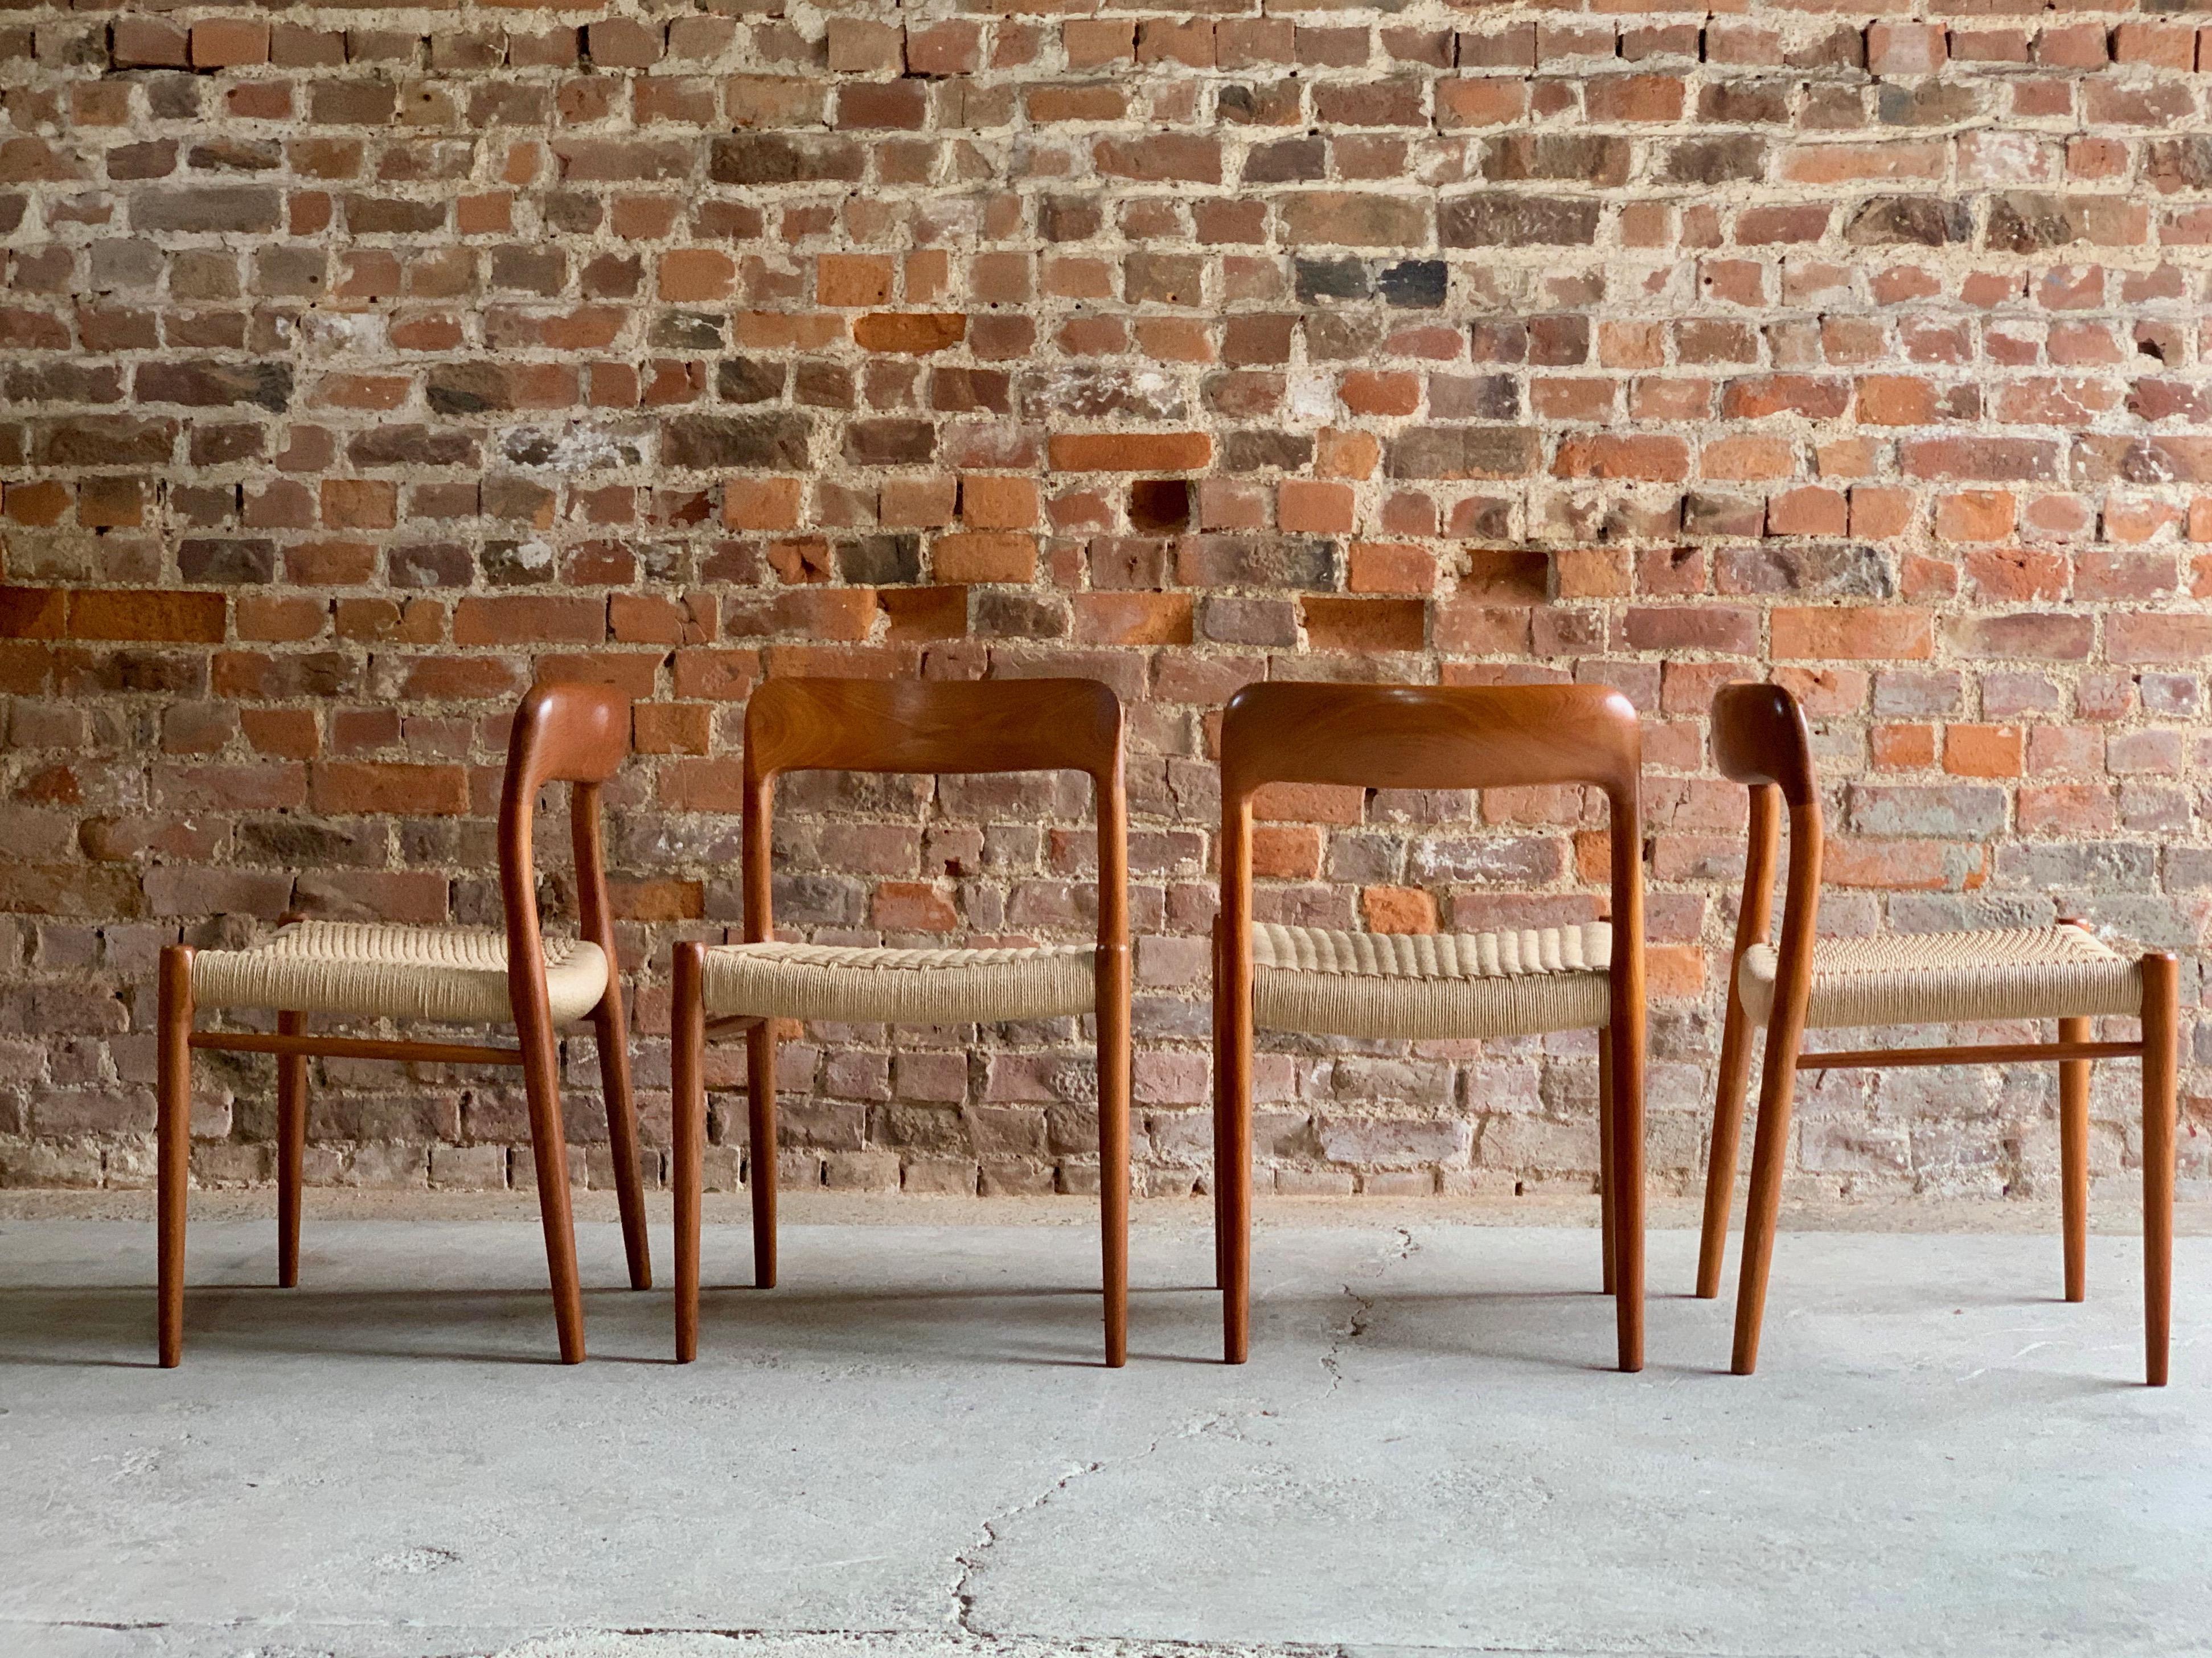 A magnificent set of four model 75 chairs by Danish designer Niels Otto Møller, and manufactured by JL Møllers Møbelfabrik chair featuring frames made of solid teak and seating made of paper cord. 

Condition: The chairs are offered in excellent